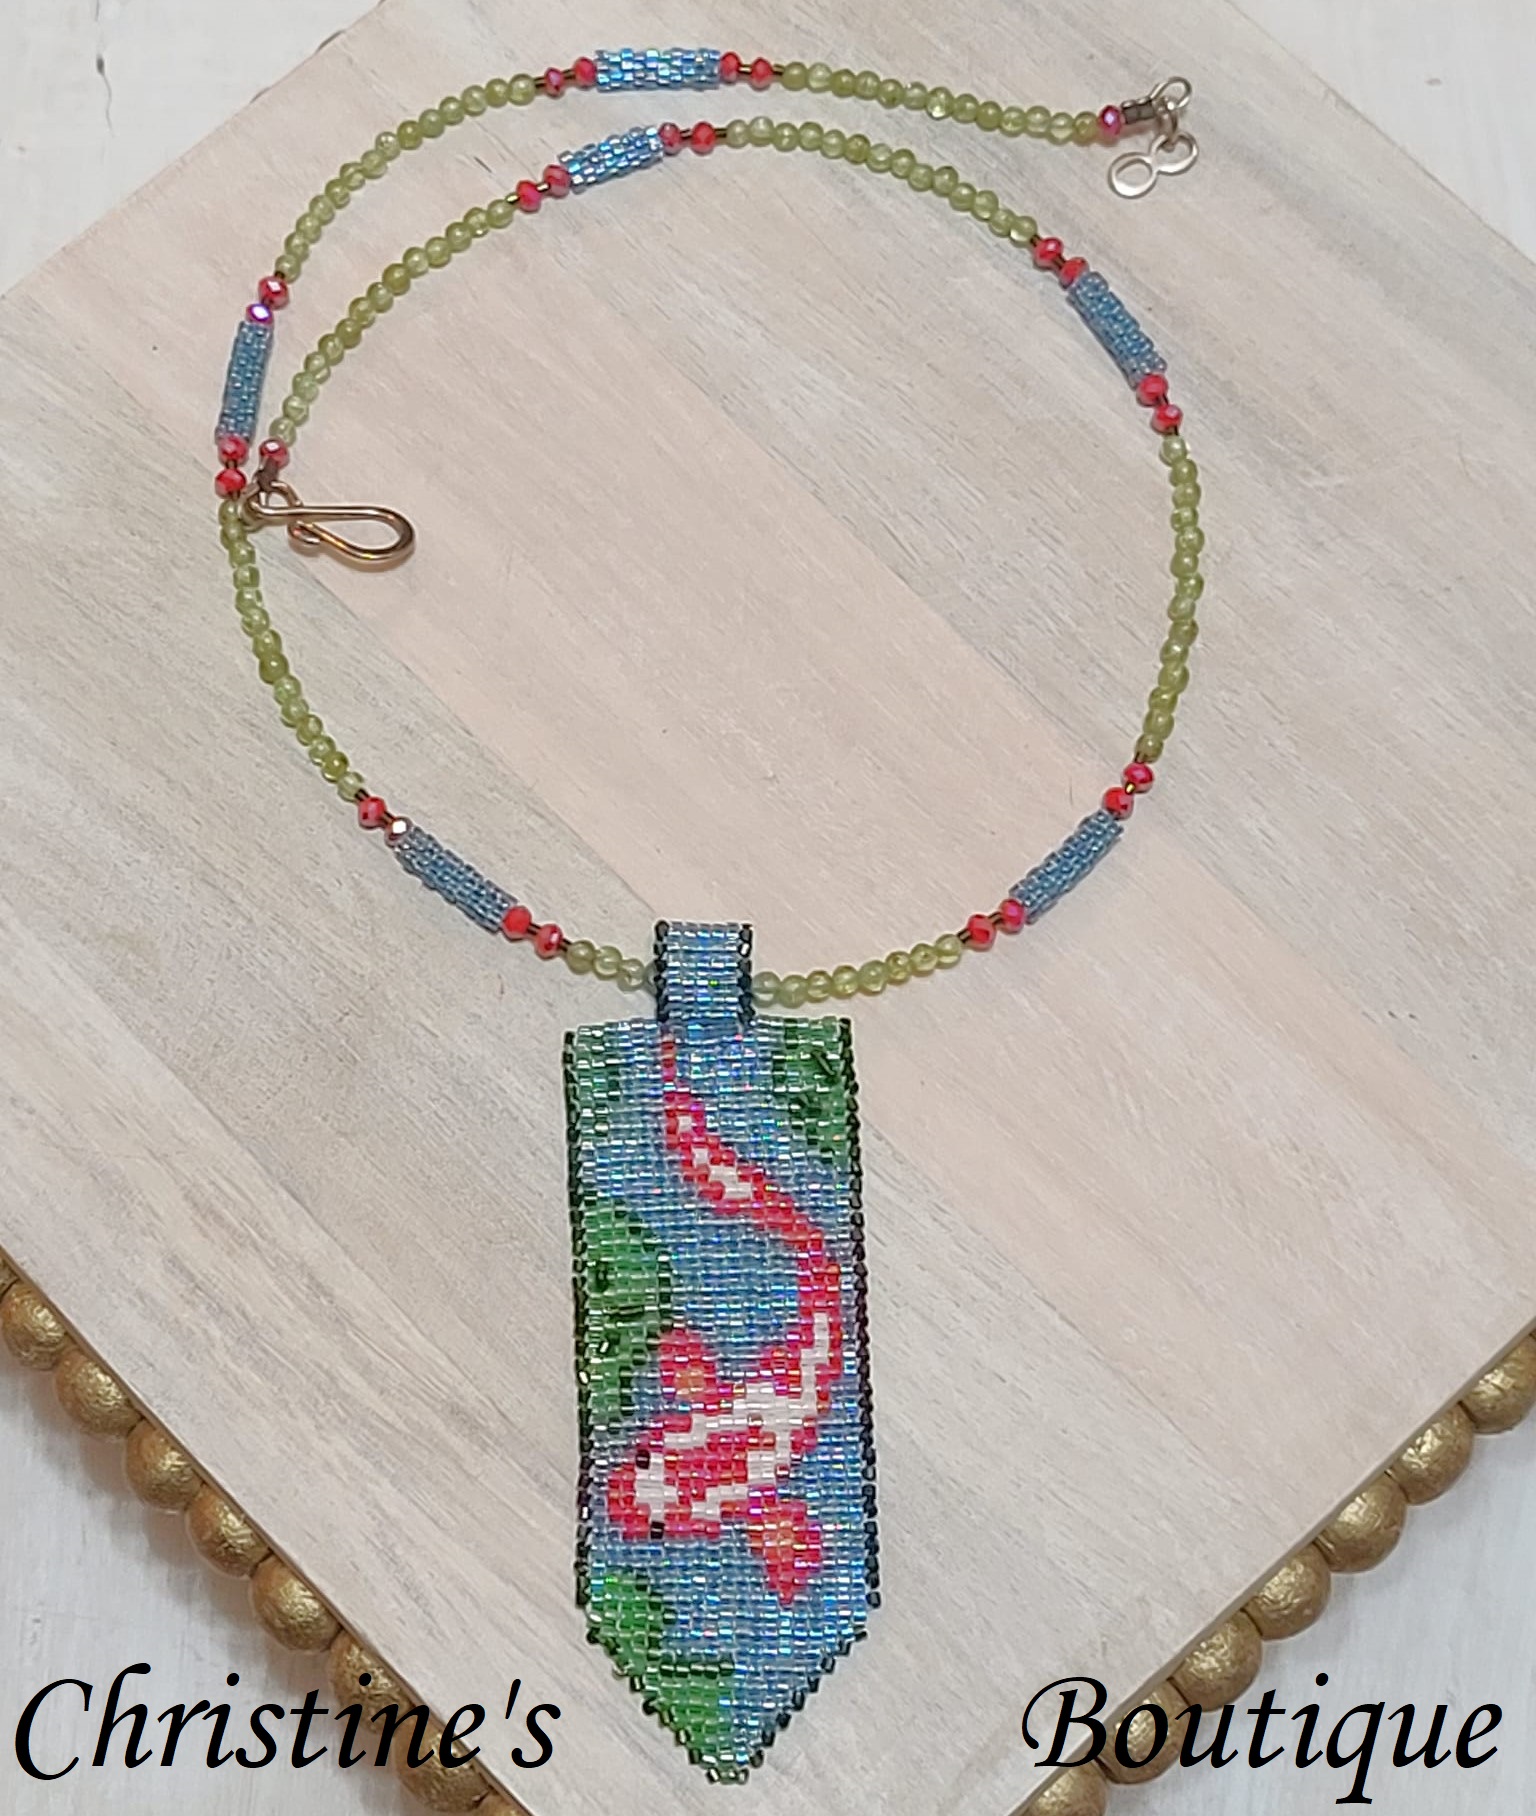 Koi Fish Hand Stitched Pendant Necklace w/Jade Gems Accents - Click Image to Close